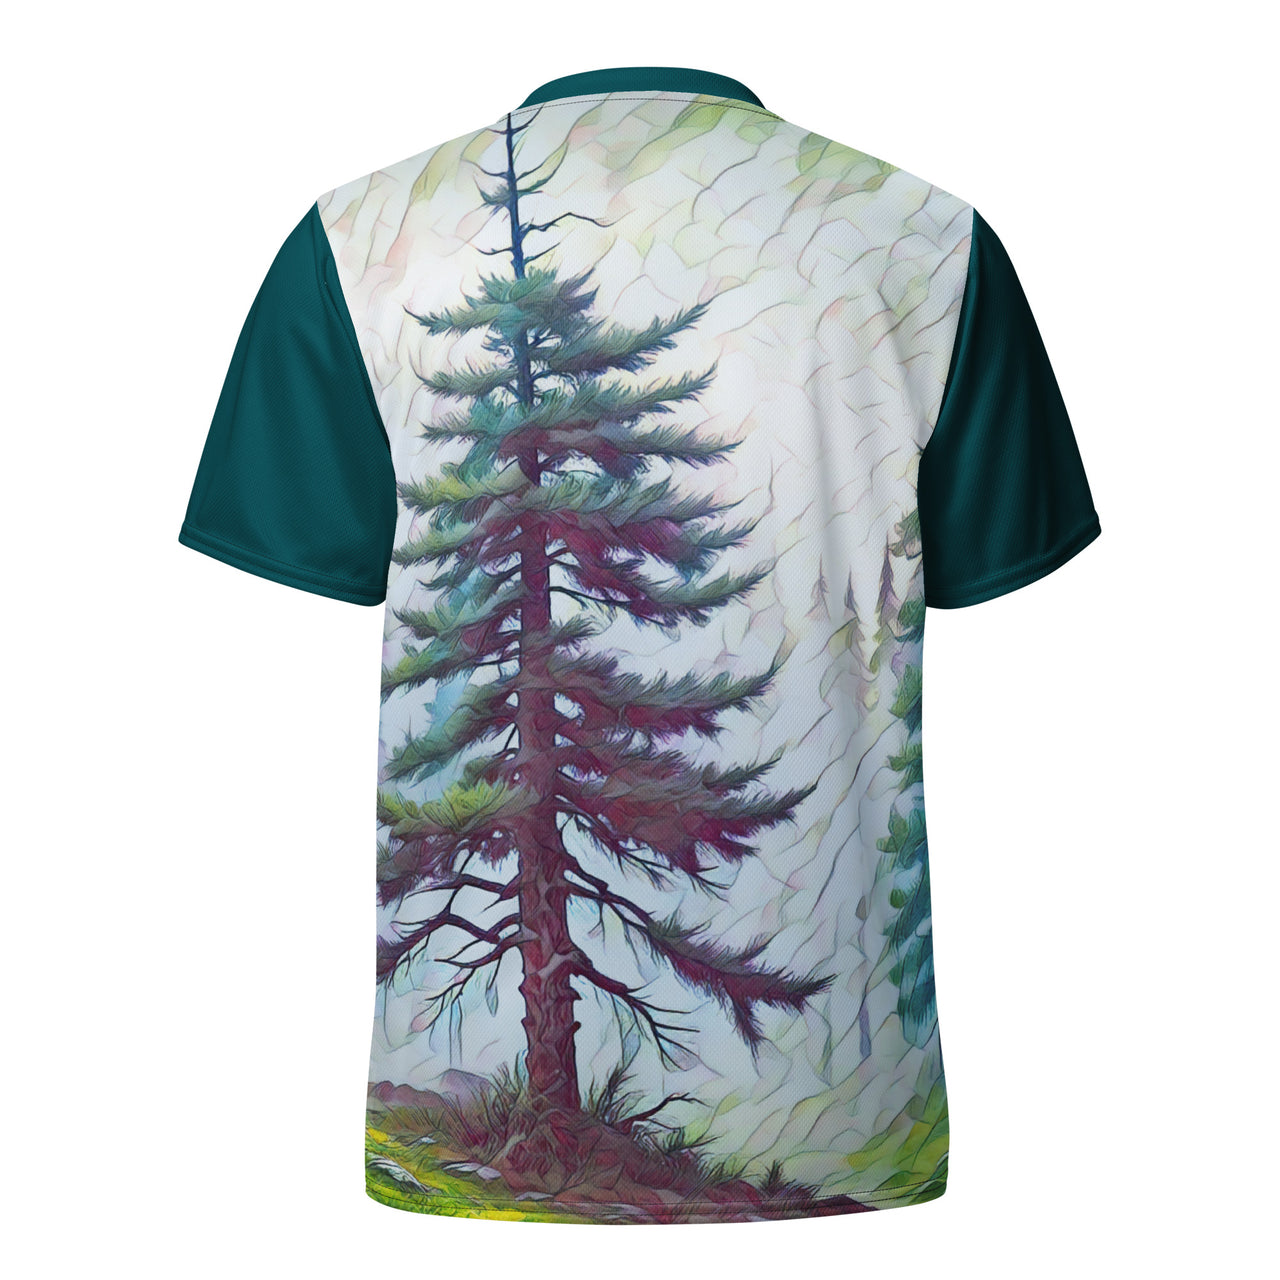 Into The Woods - Recycled unisex sports jersey